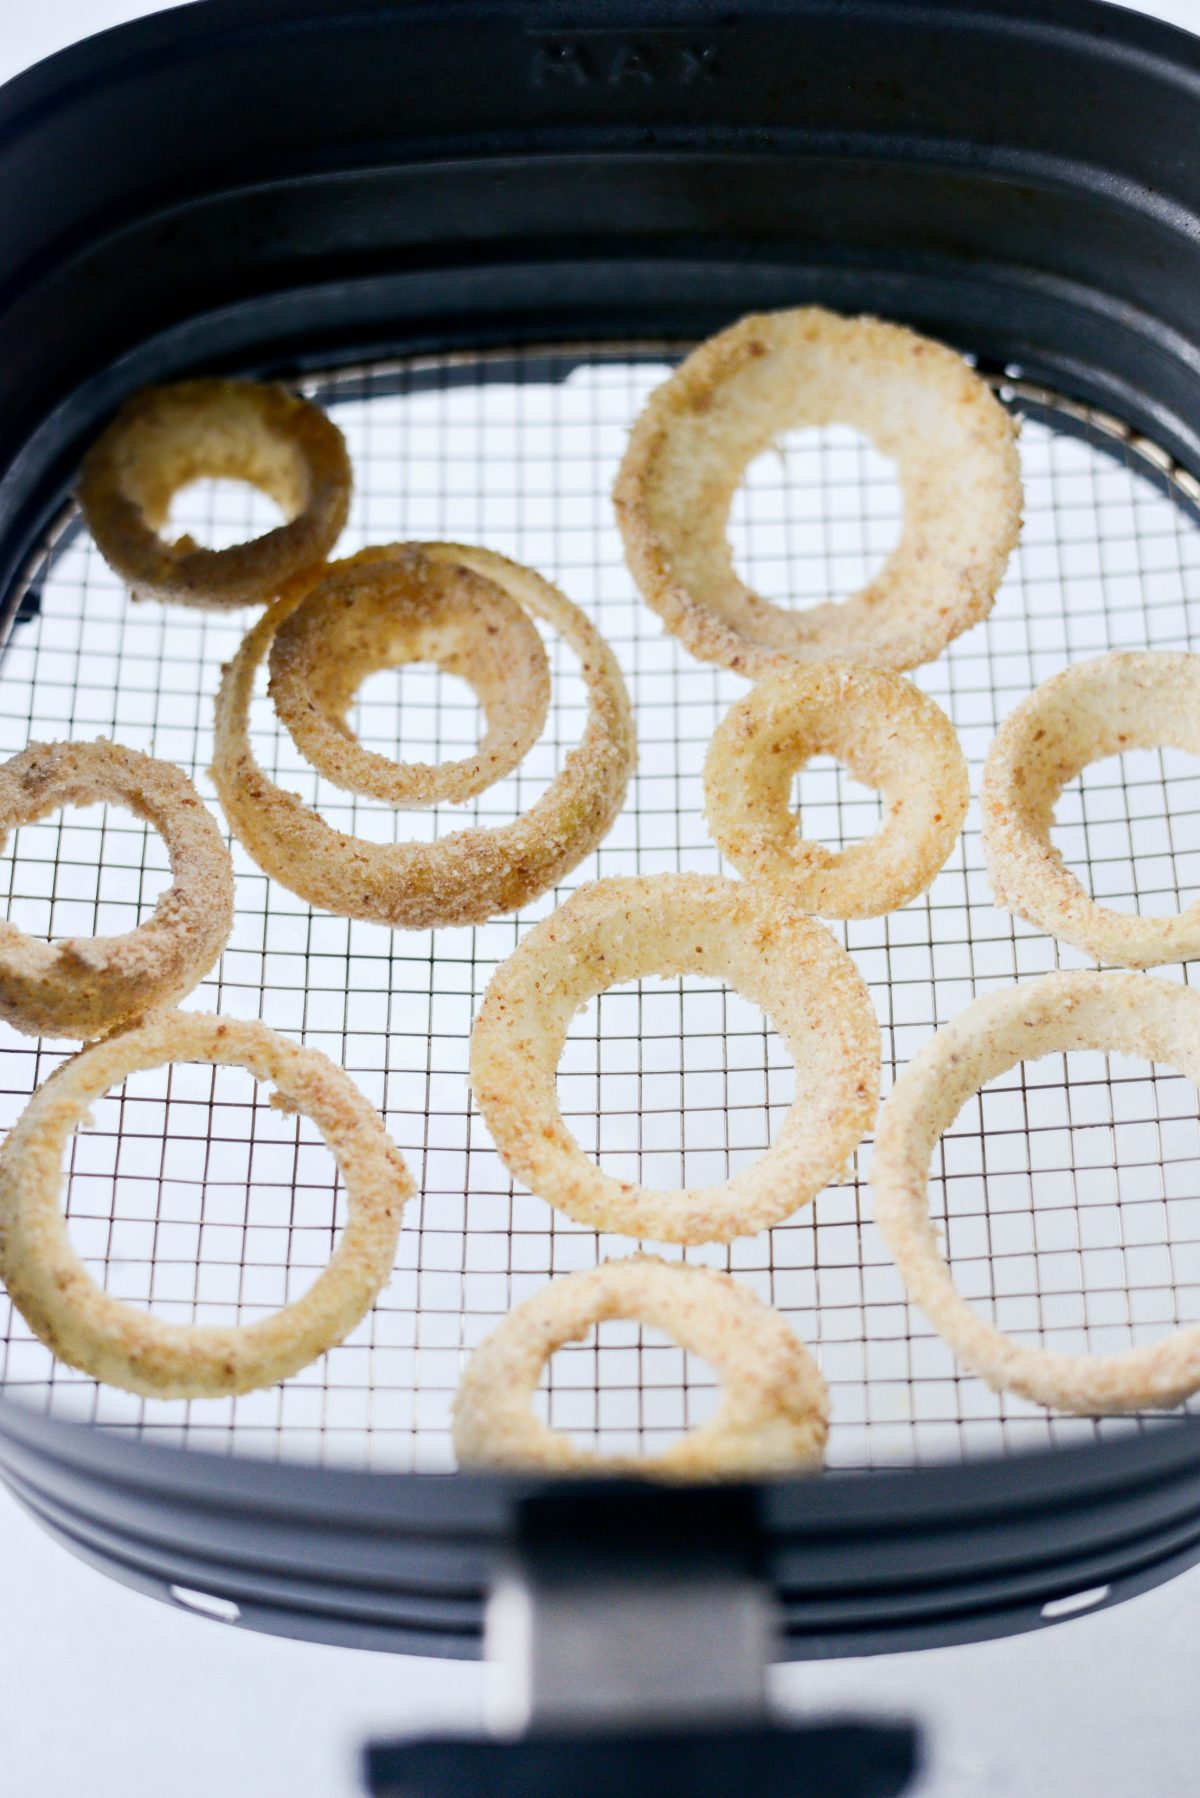 work in batches air frying the onion rings